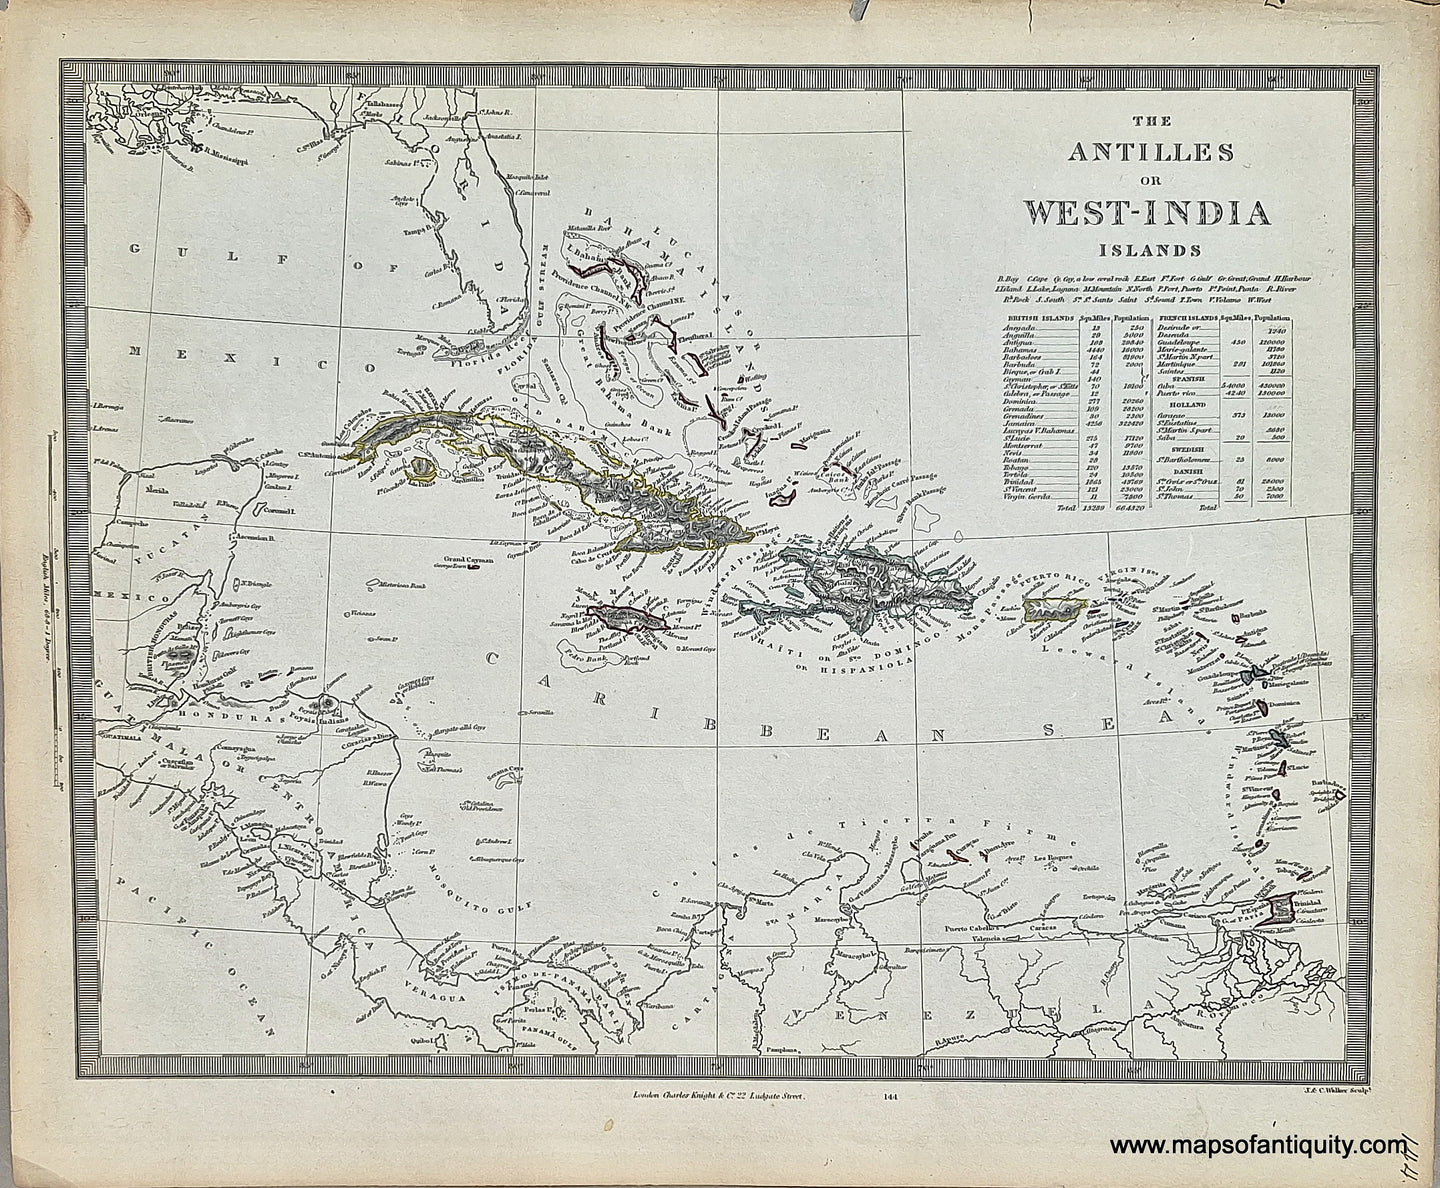 Antique-Hand-Colored-Map-The-Antilles-or-West-India-Islands-Central-America-and-Caribbean-West-Indies-1850-SDUK/Society-for-the-Diffusion-of-Useful-Knowledge-Maps-Of-Antiquity